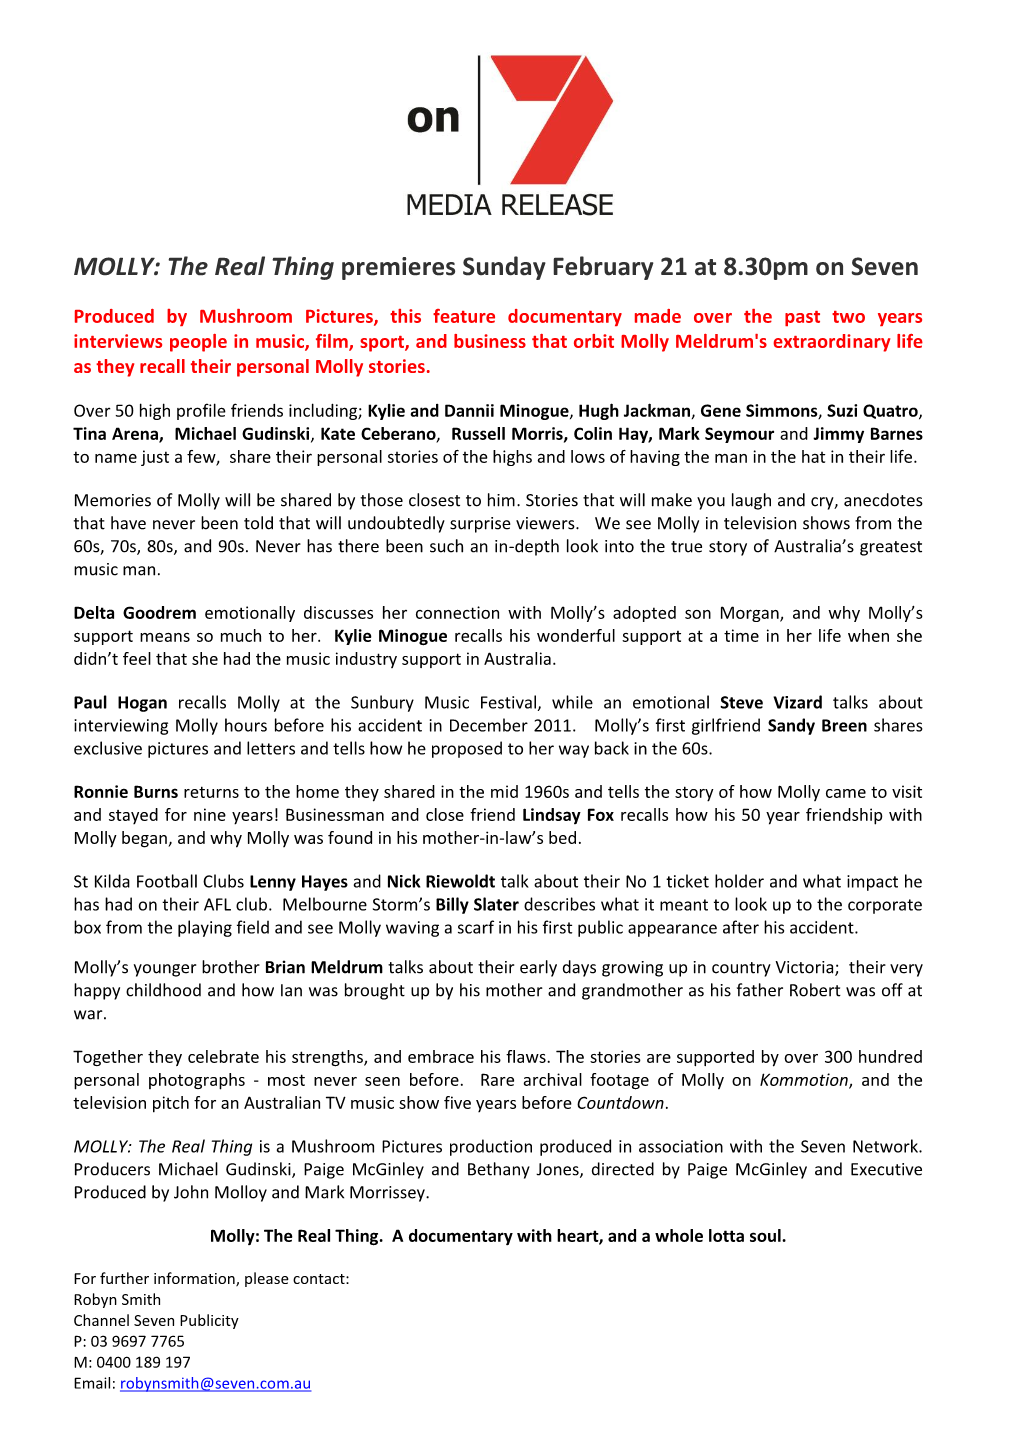 Media Release MOLLY the Real Thing